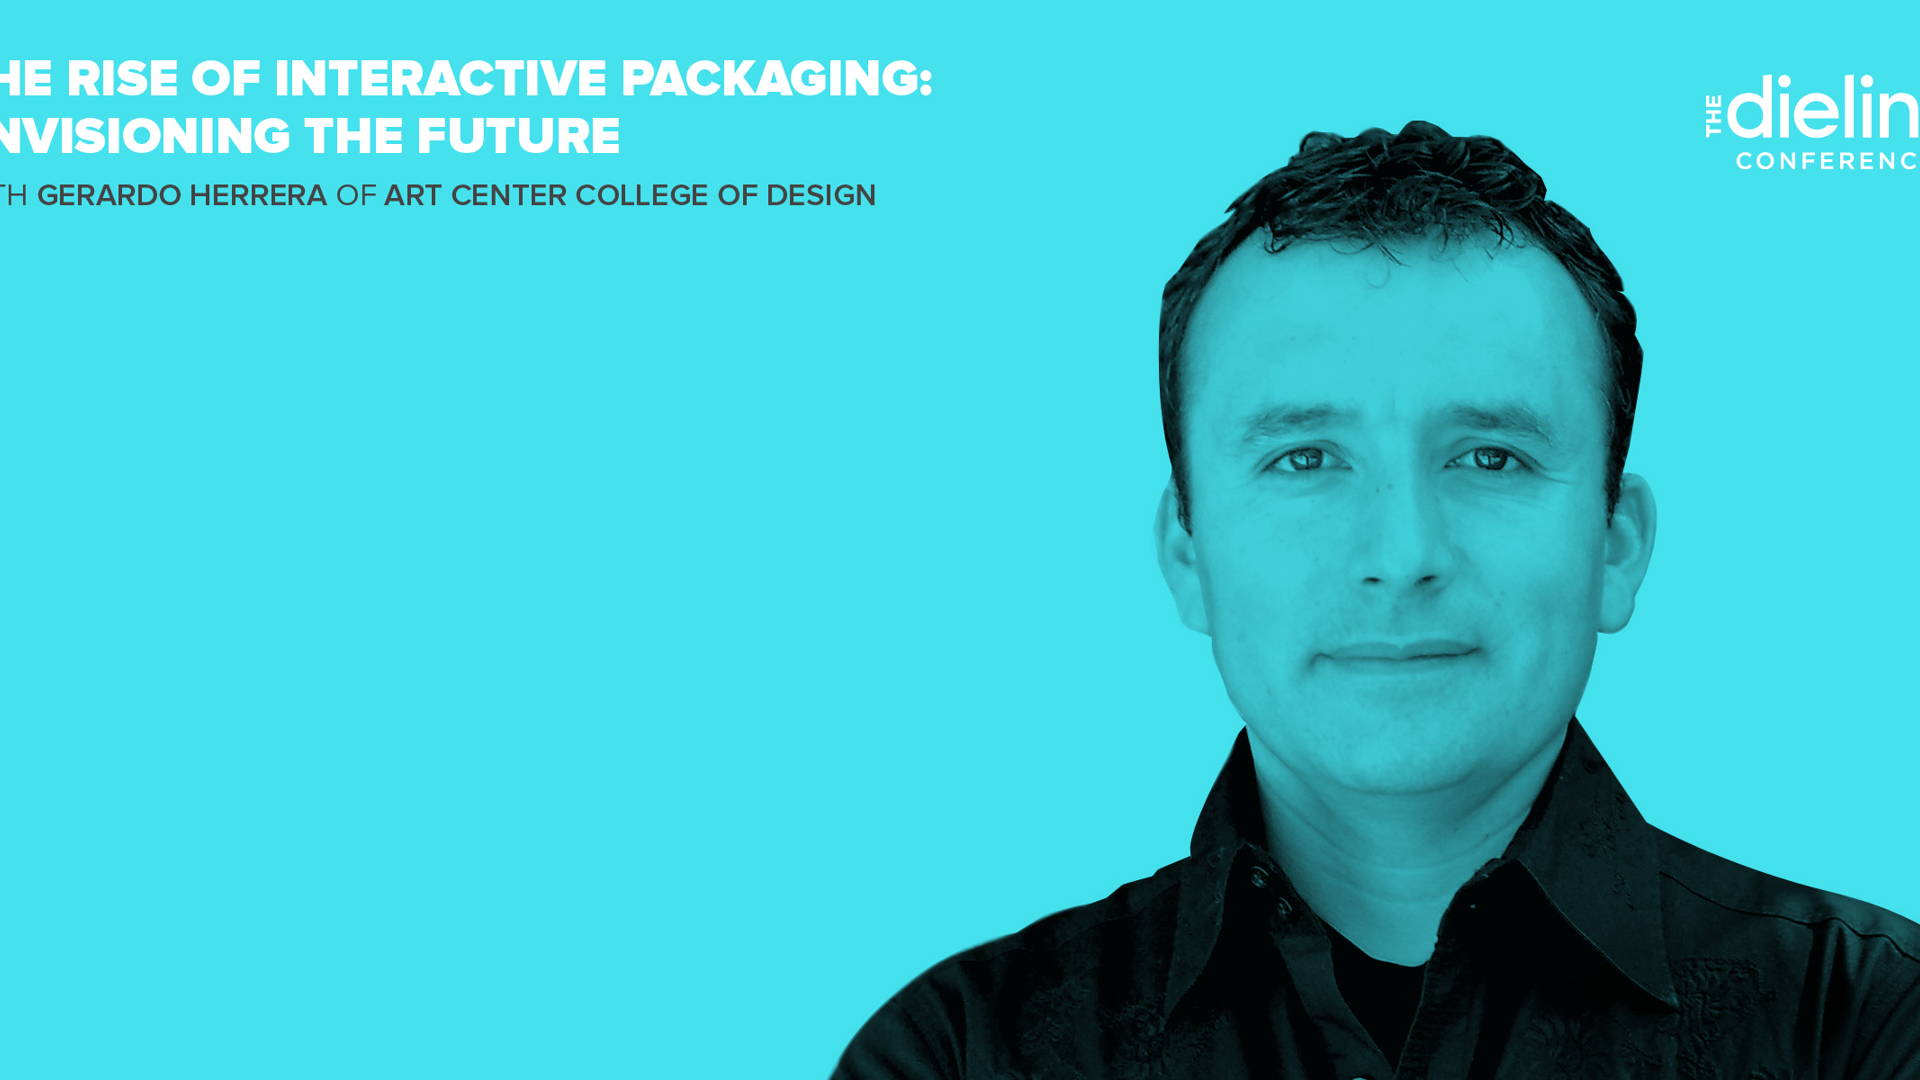 Featured image for The Rise of Interactive Packaging, Envisioning the Future: Meet Gerardo Herrera of Art Center